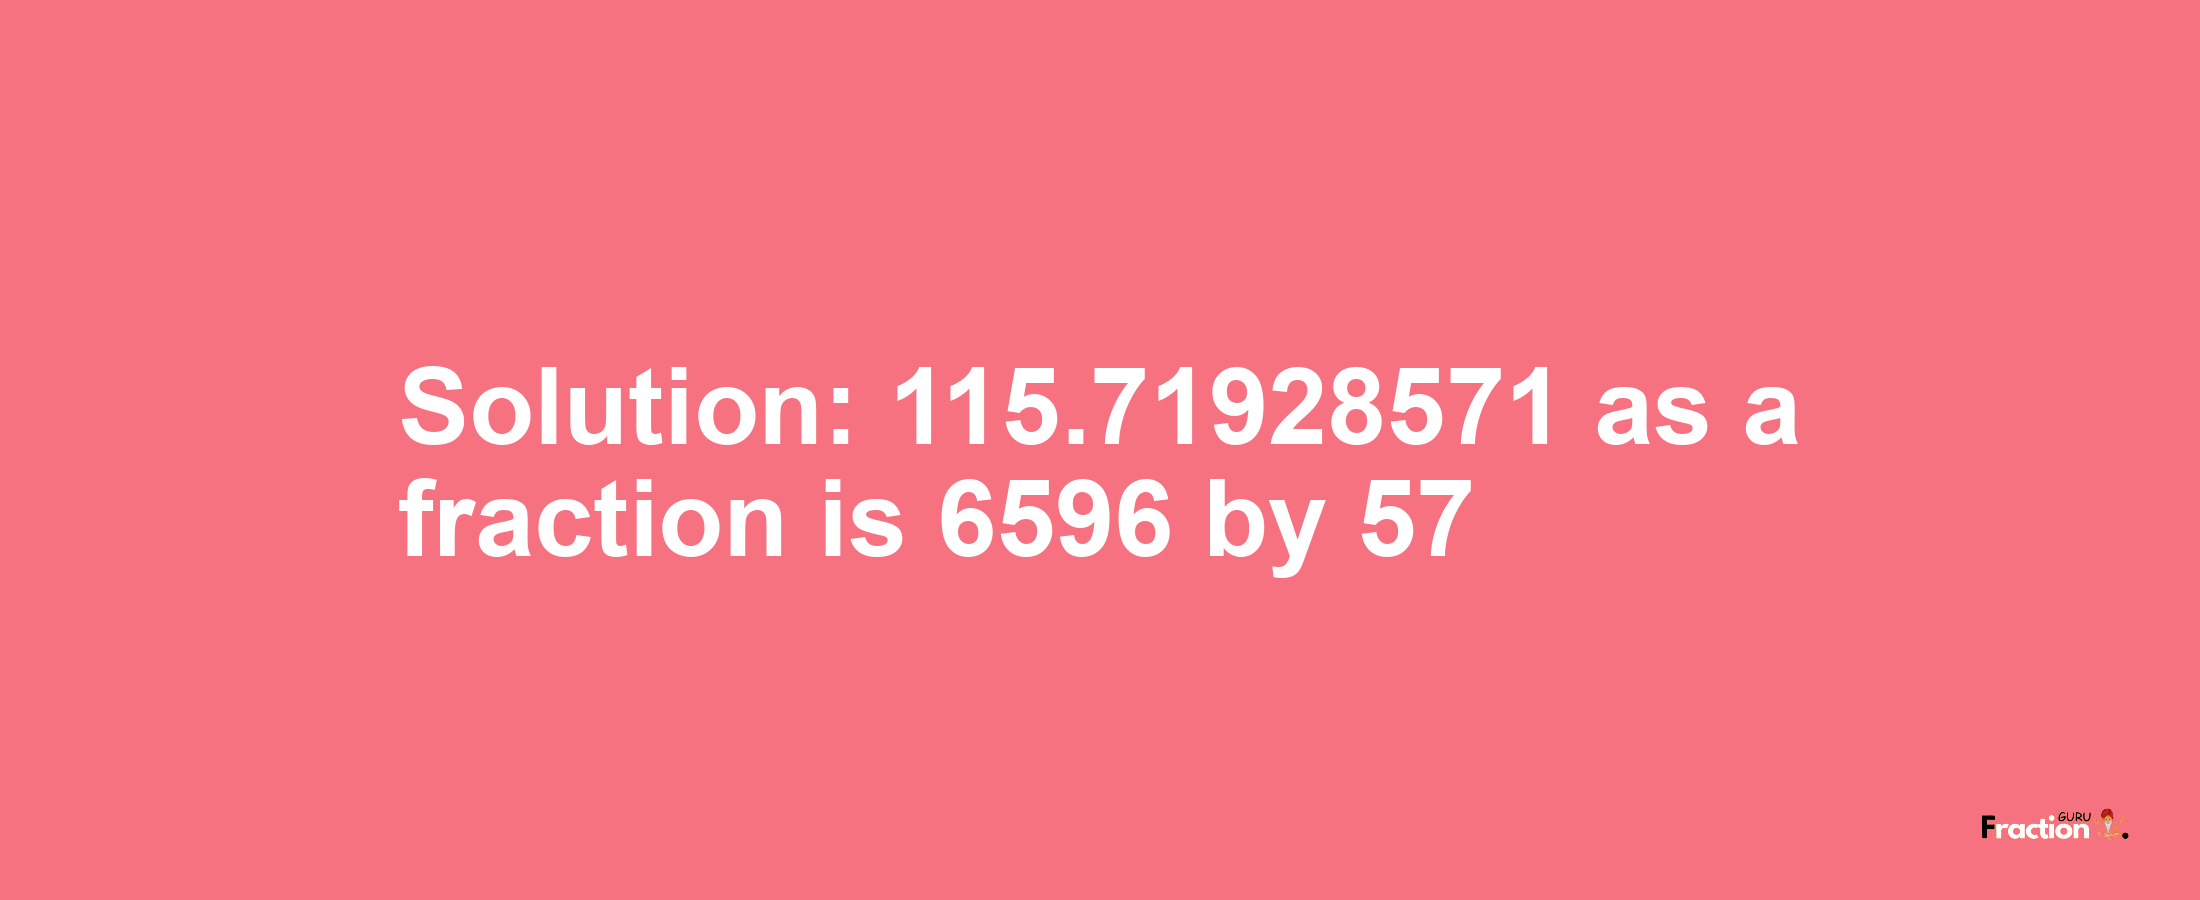 Solution:115.71928571 as a fraction is 6596/57